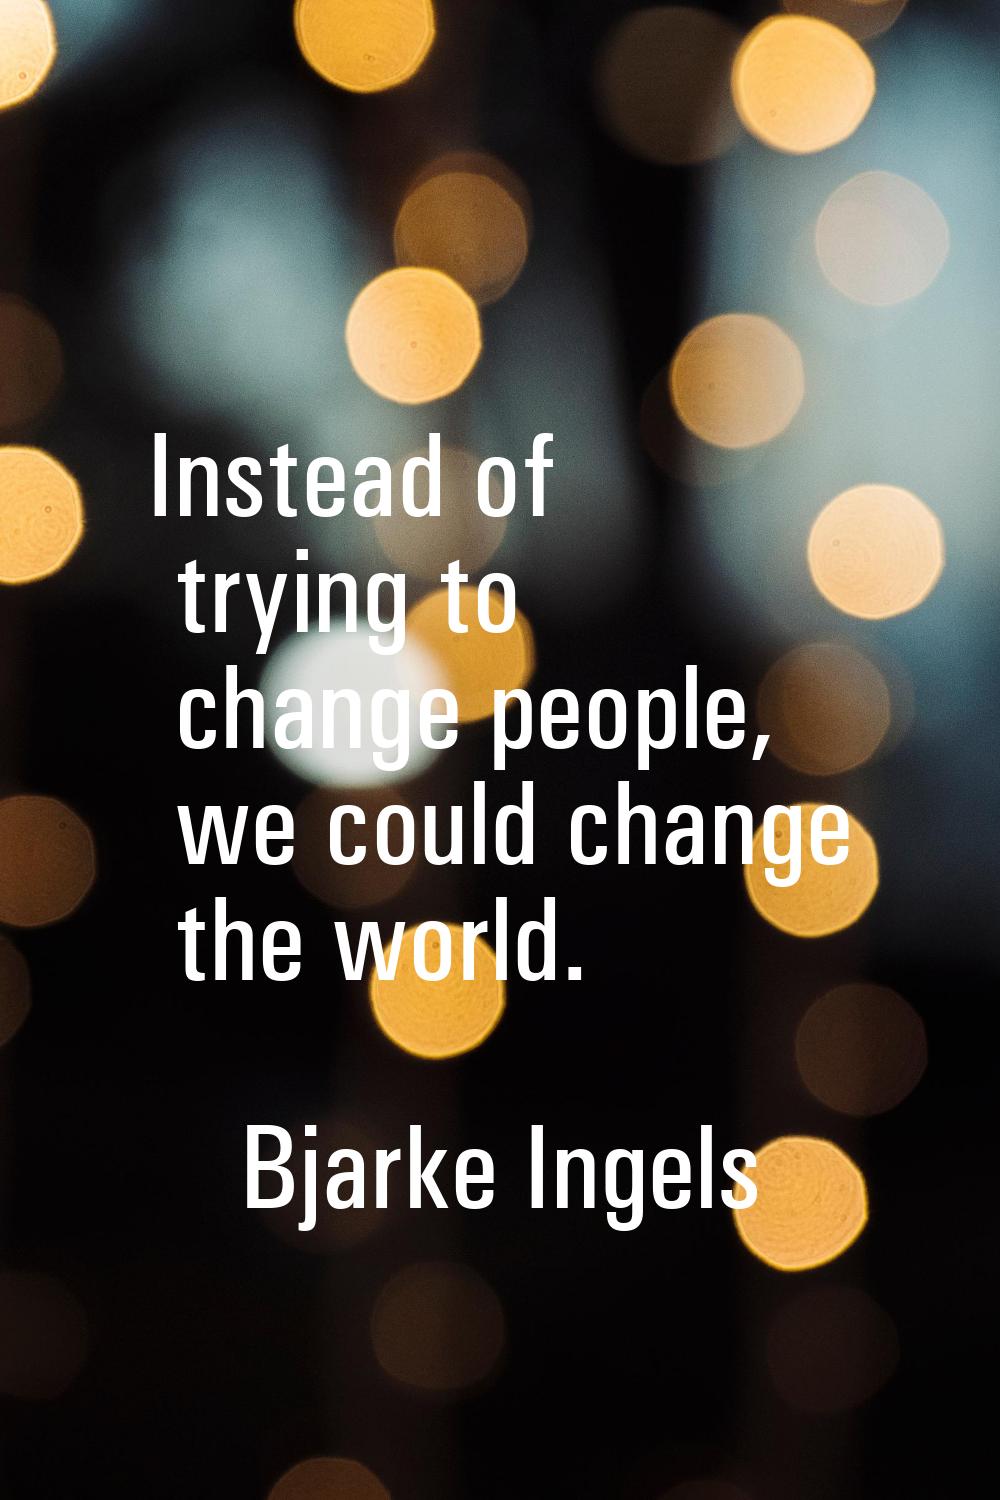 Instead of trying to change people, we could change the world.